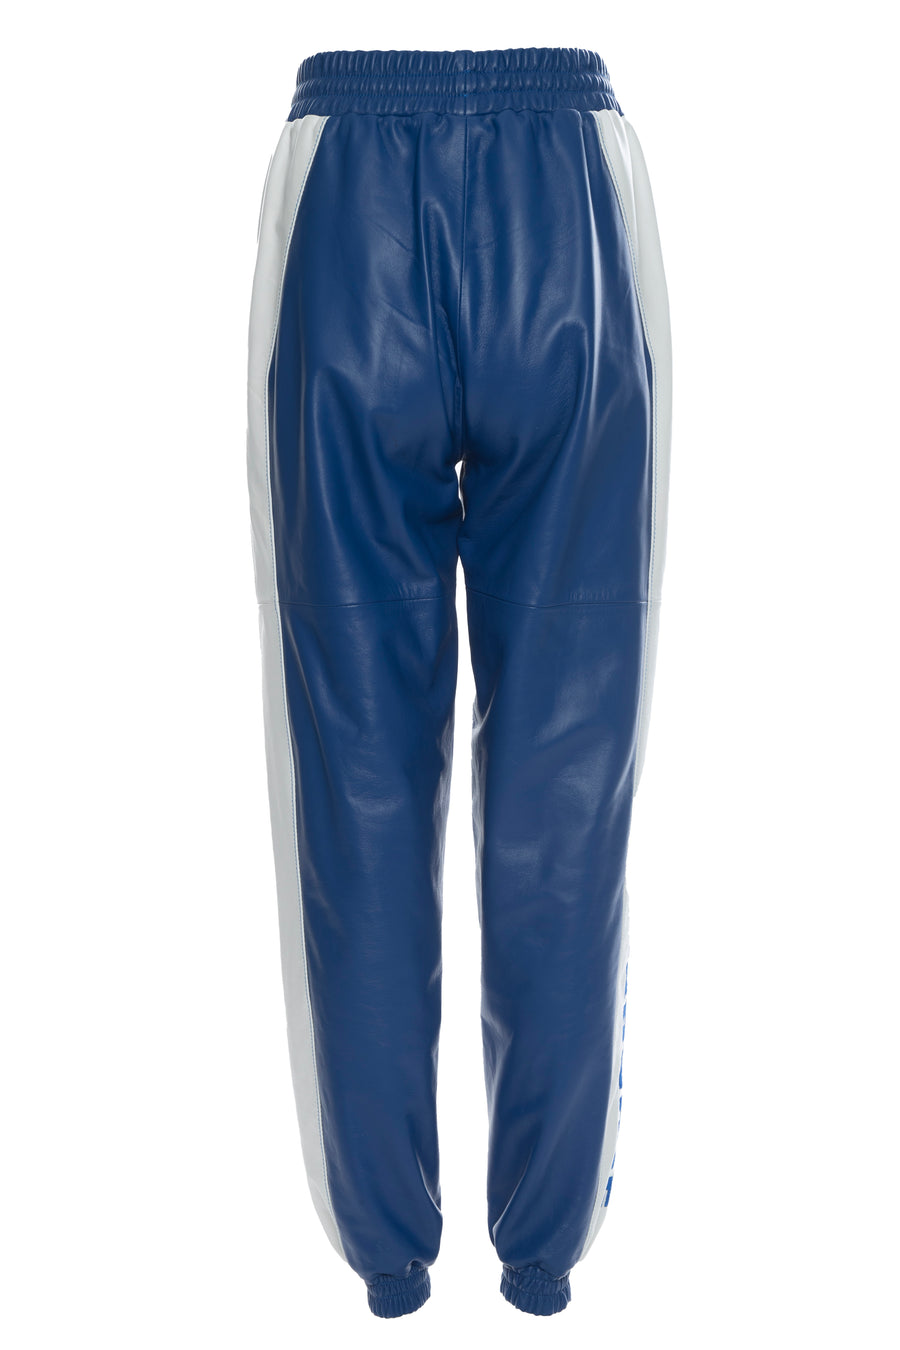 THE VIRALIZER UNISEX LEATHER TROUSERS IN WHITE AND ROYAL BLUE